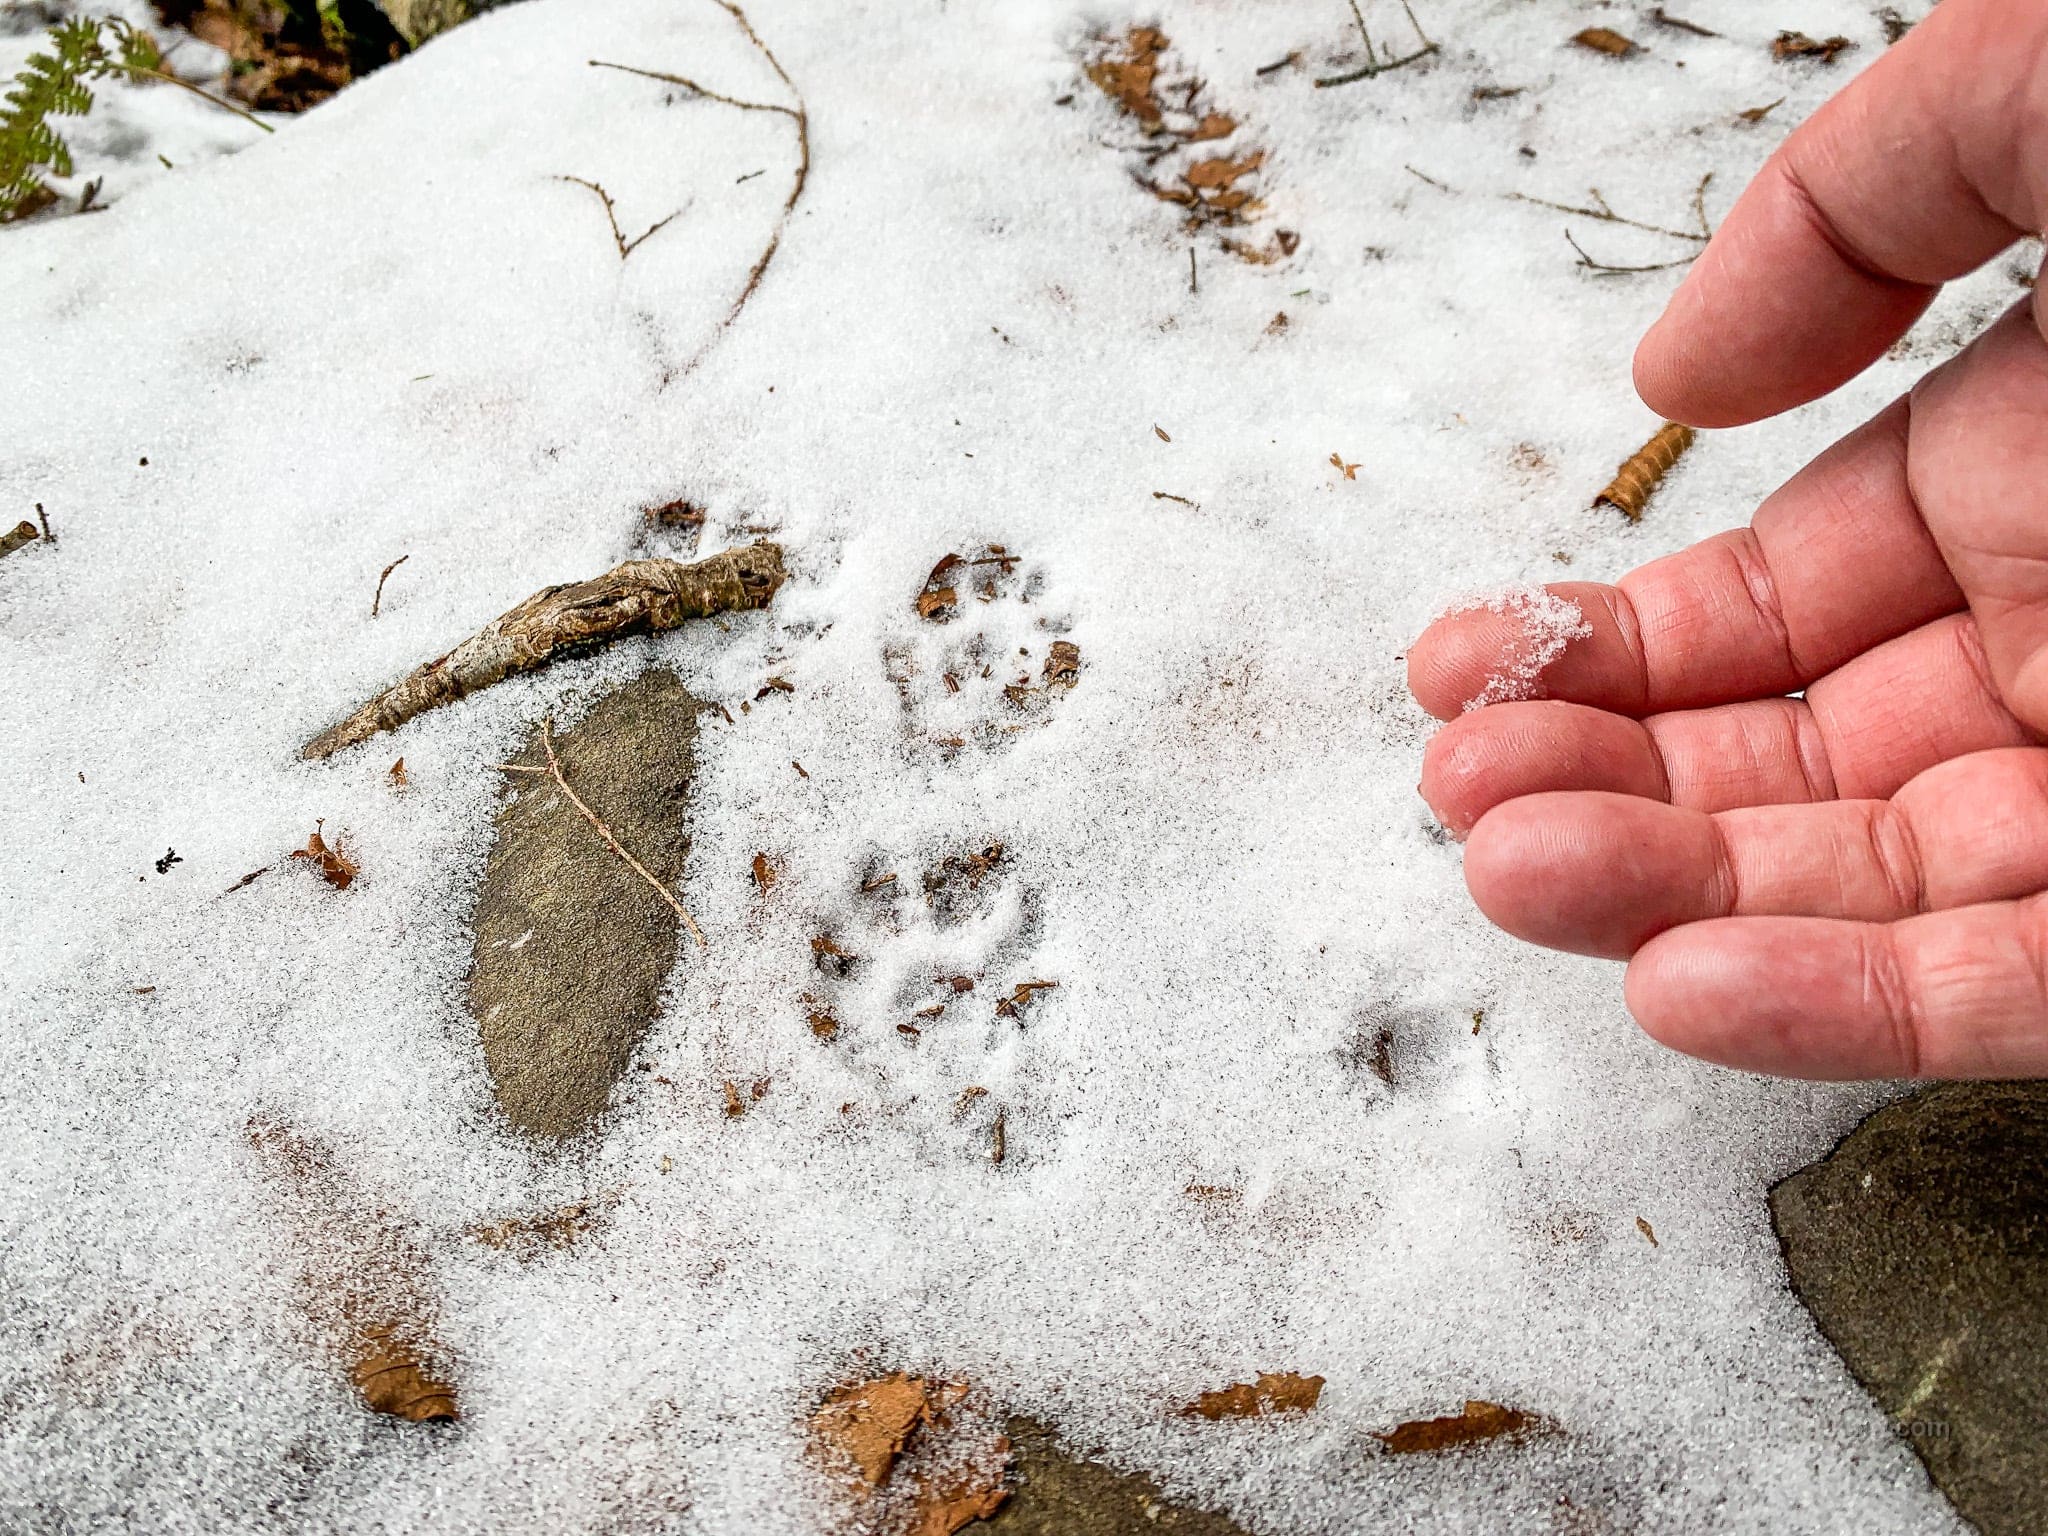 animal prints in snow with human hand for scale